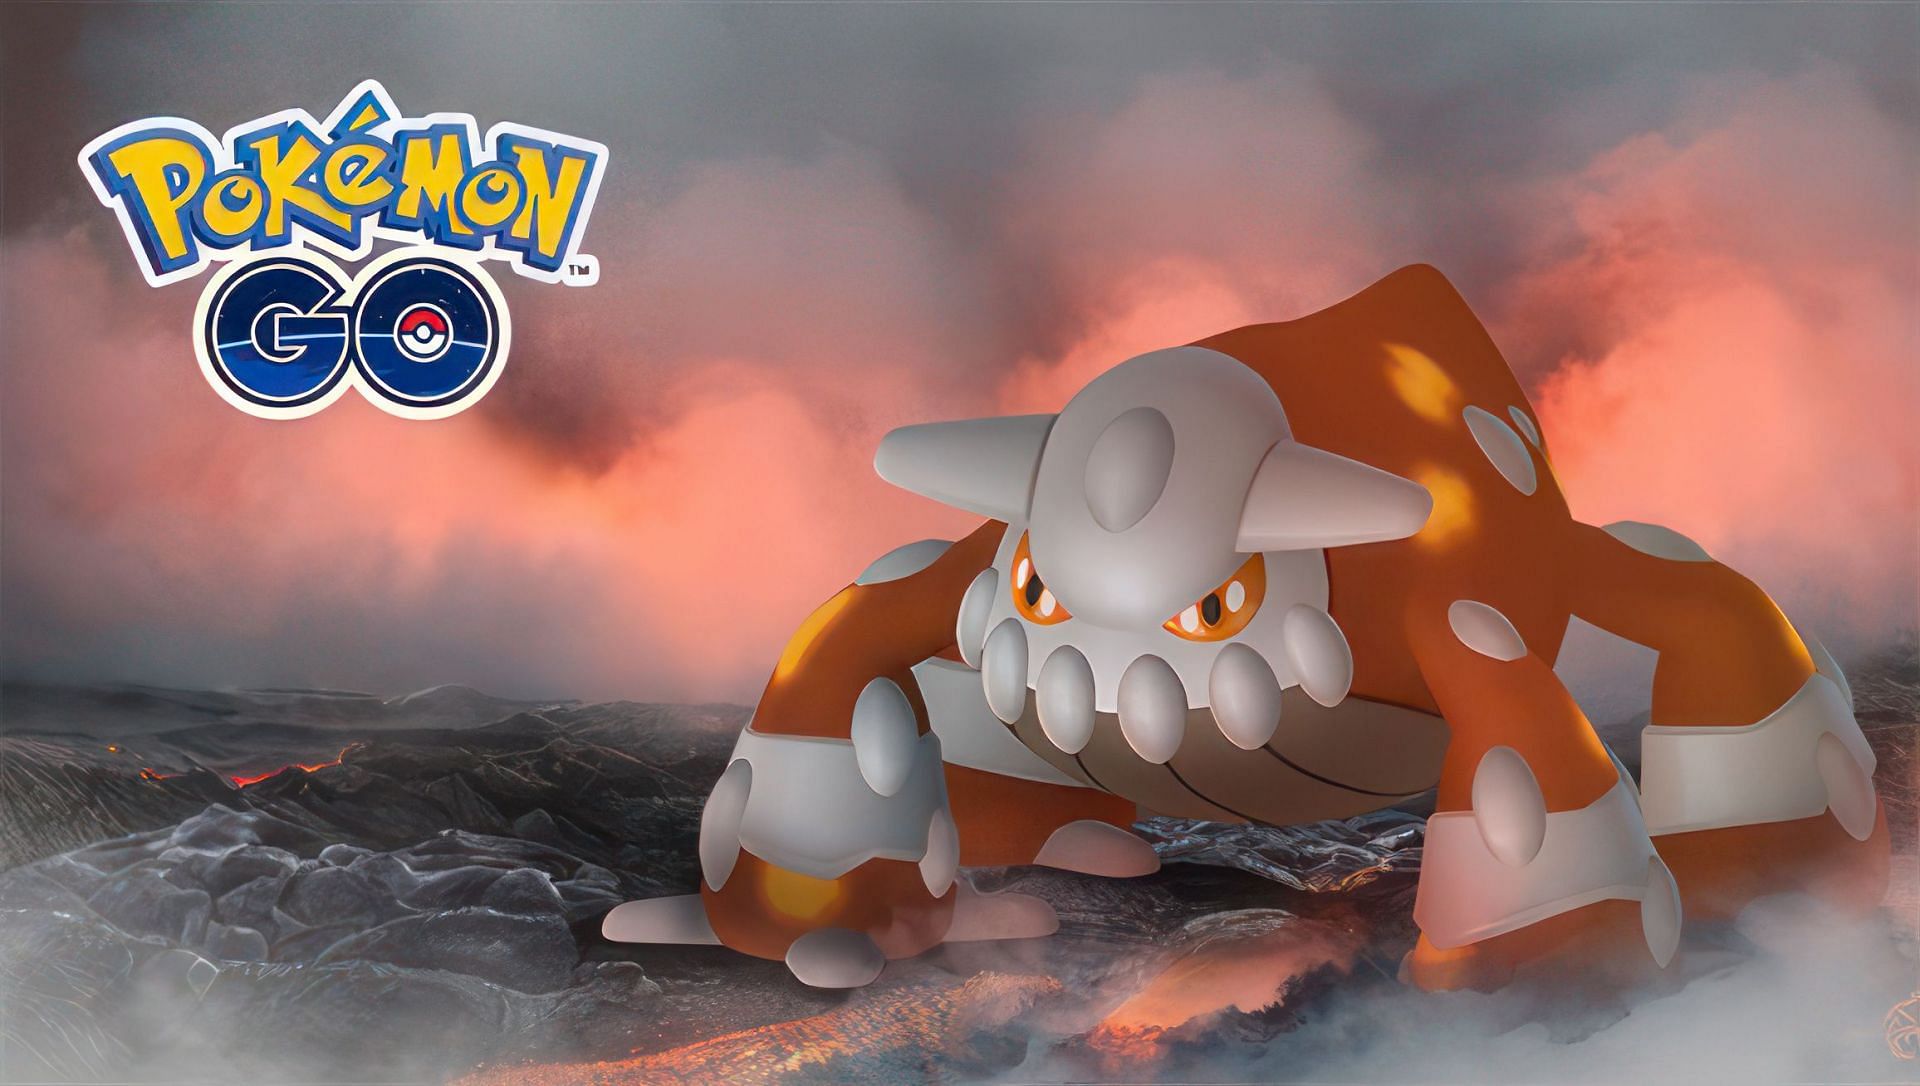 Heatran is standing on a magma flooded area